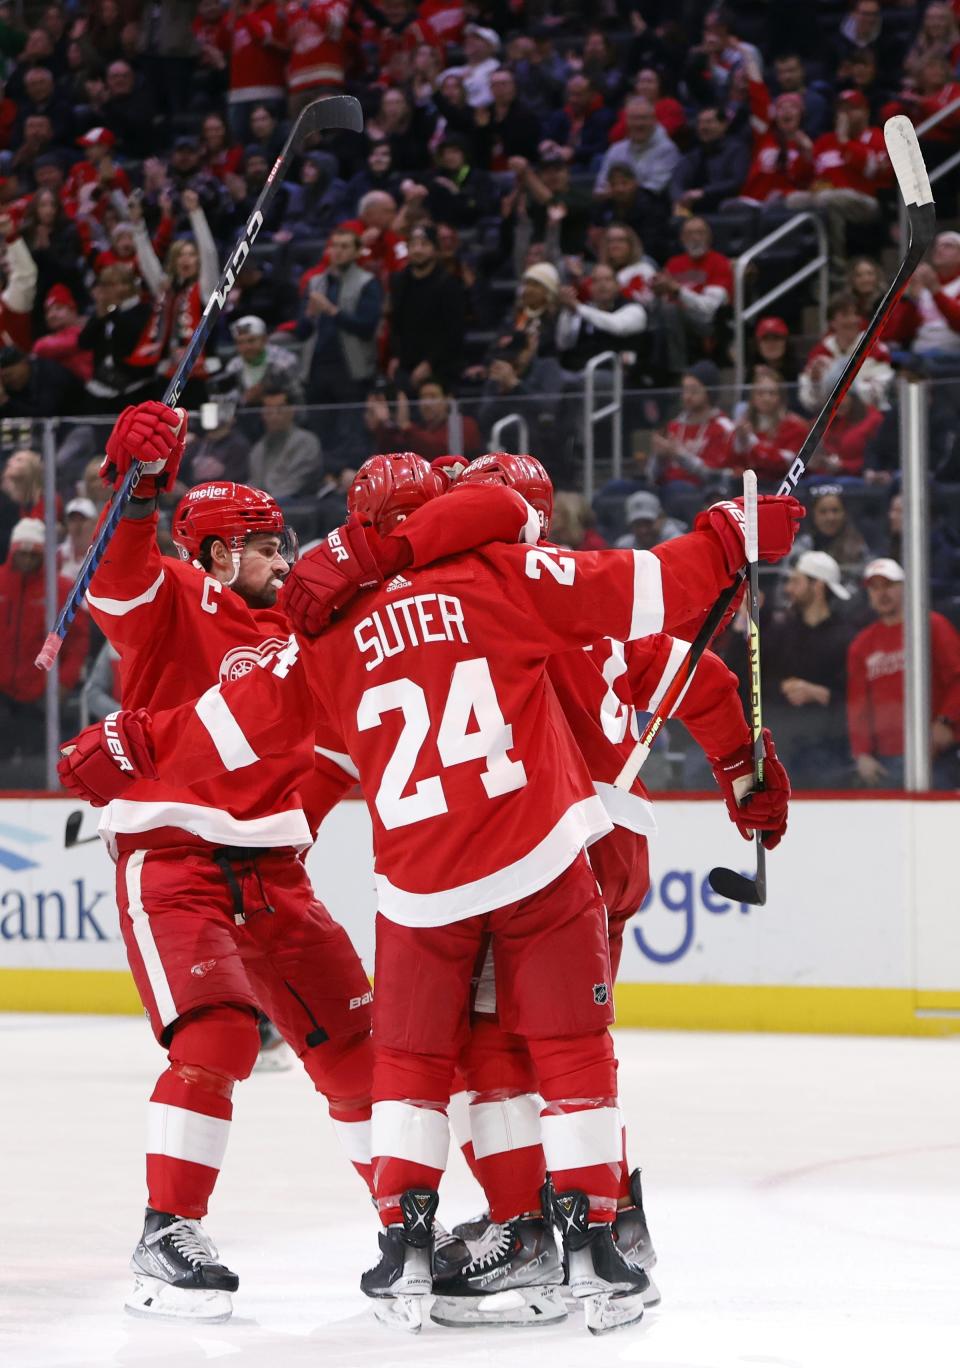 Detroit Red Wings center Pius Suter (24) celebrates with teammates, including center Dylan Larkin, left, after scoring against the Colorado Avalanche during the first period of an NHL hockey game Saturday, March 18, 2023, in Detroit. (AP Photo/Duane Burleson)